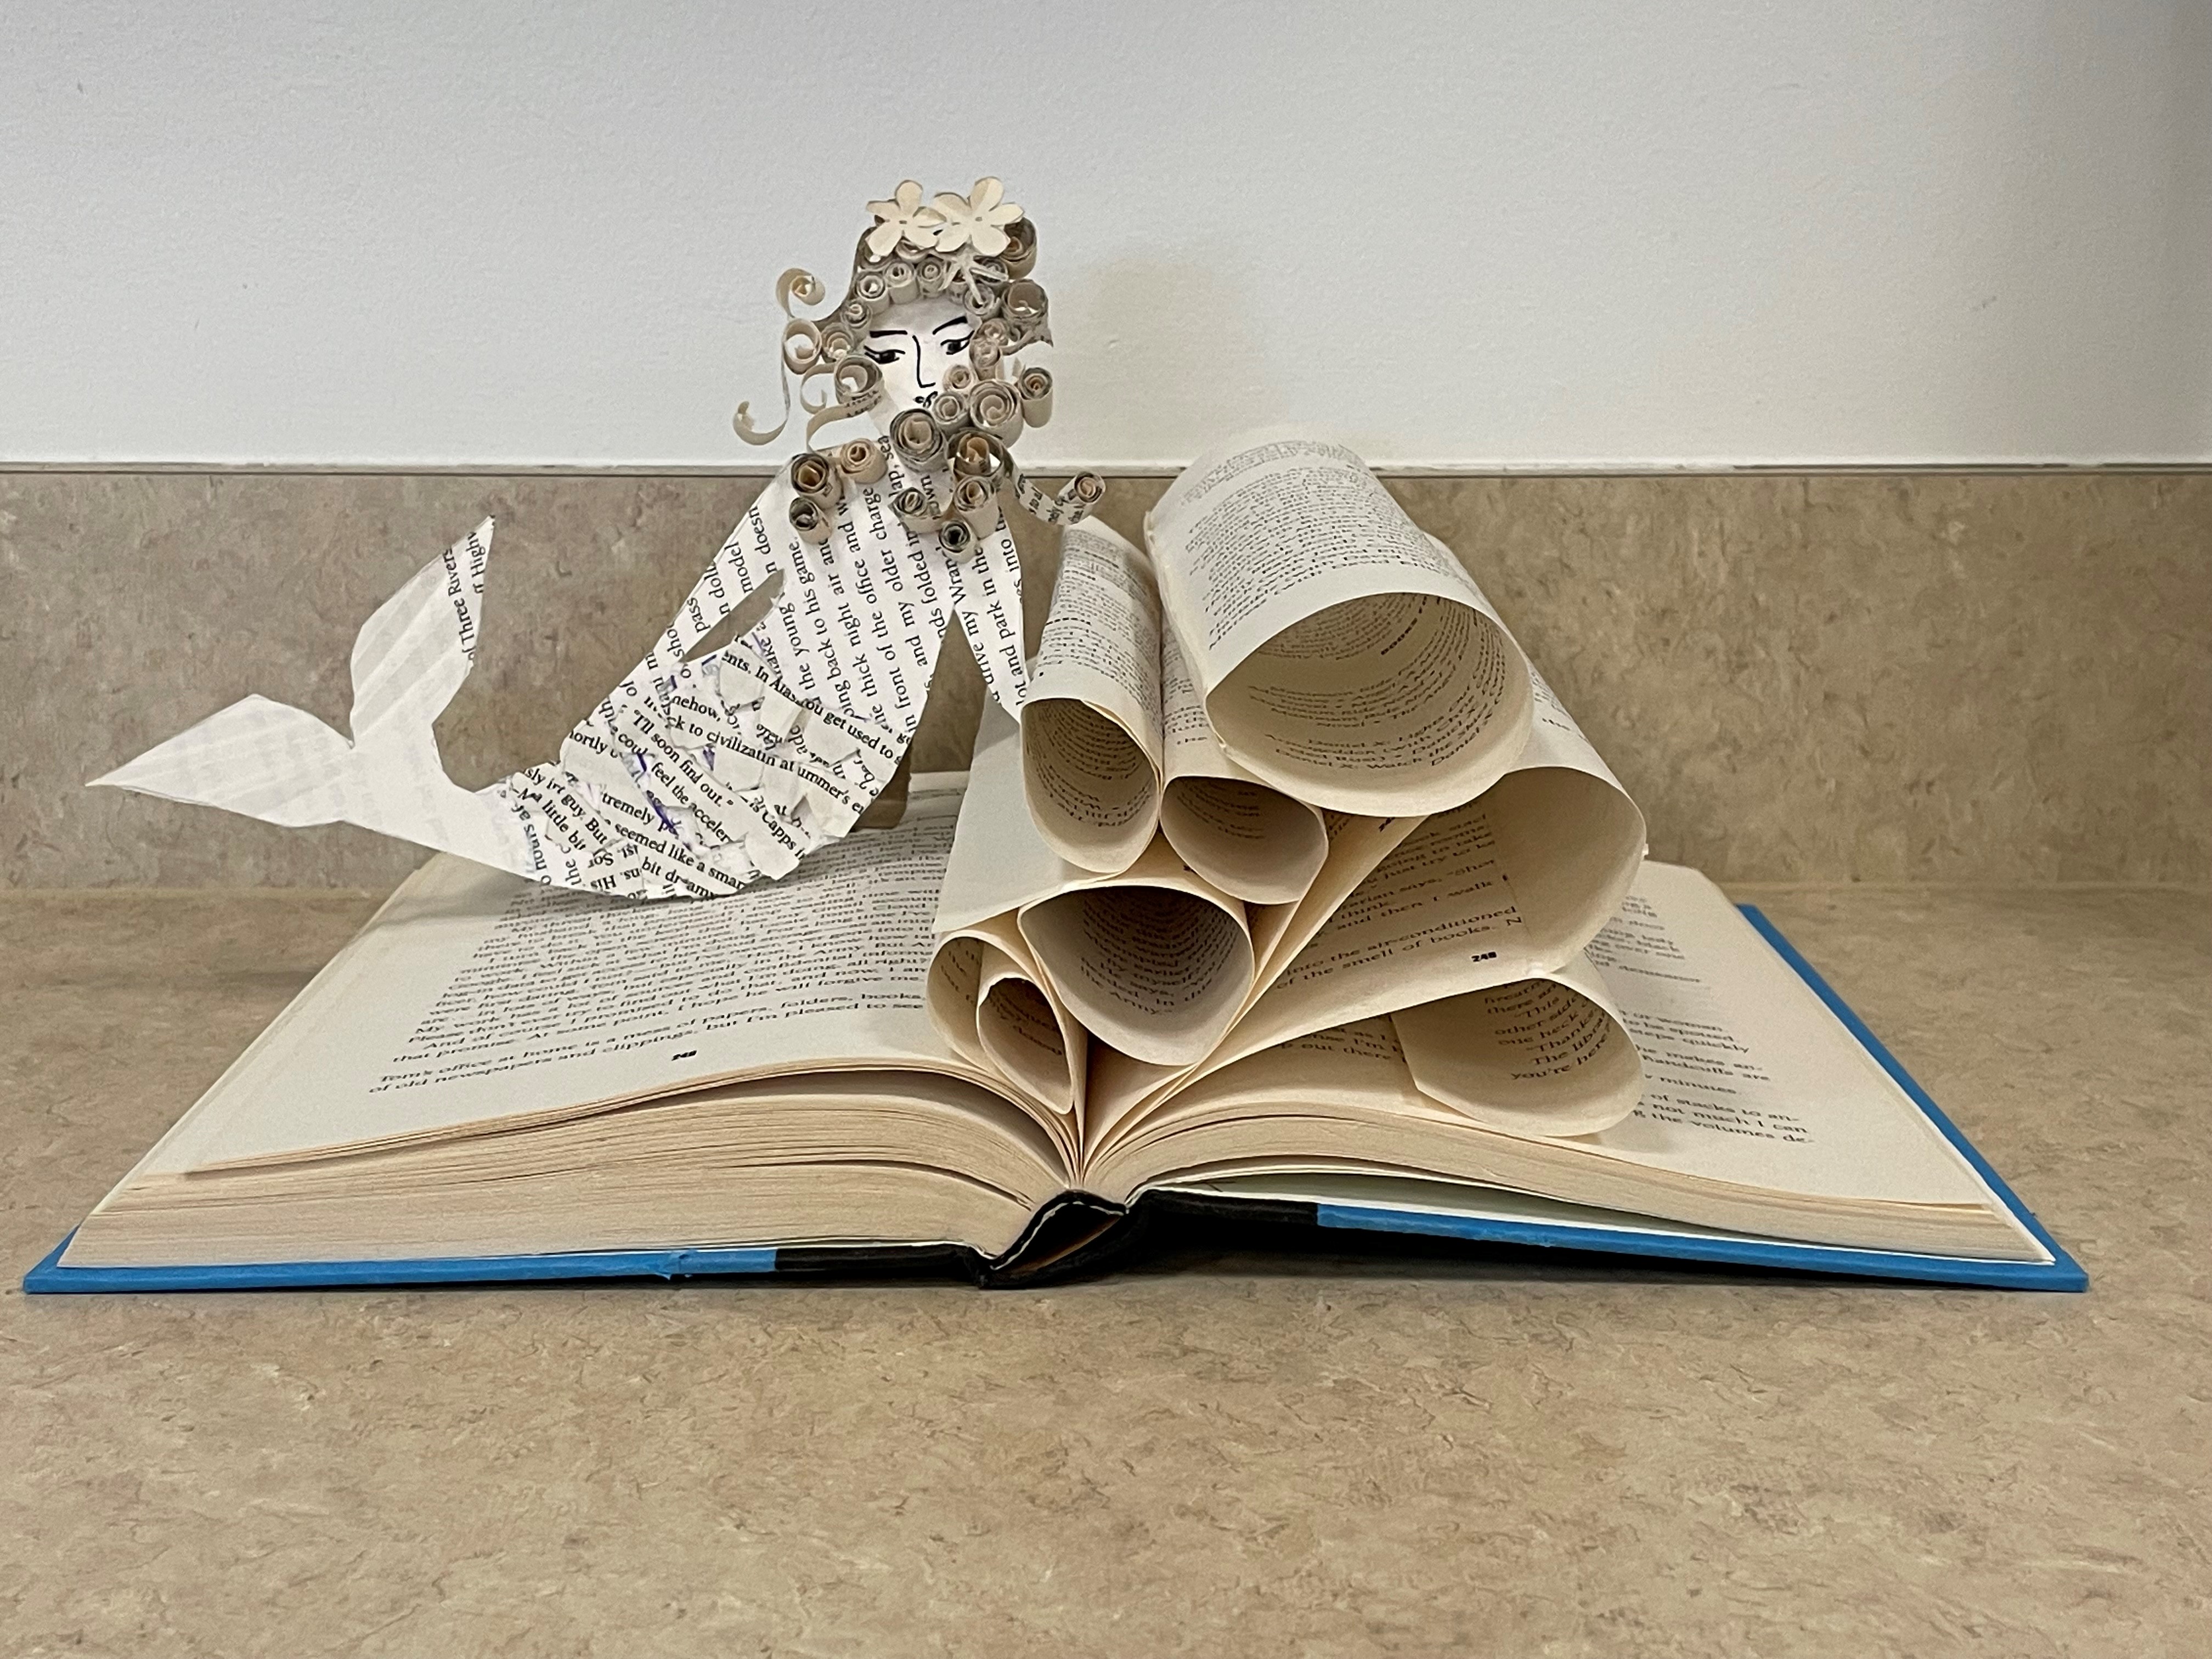 A cut-paper mermaid and waves on top of an open book